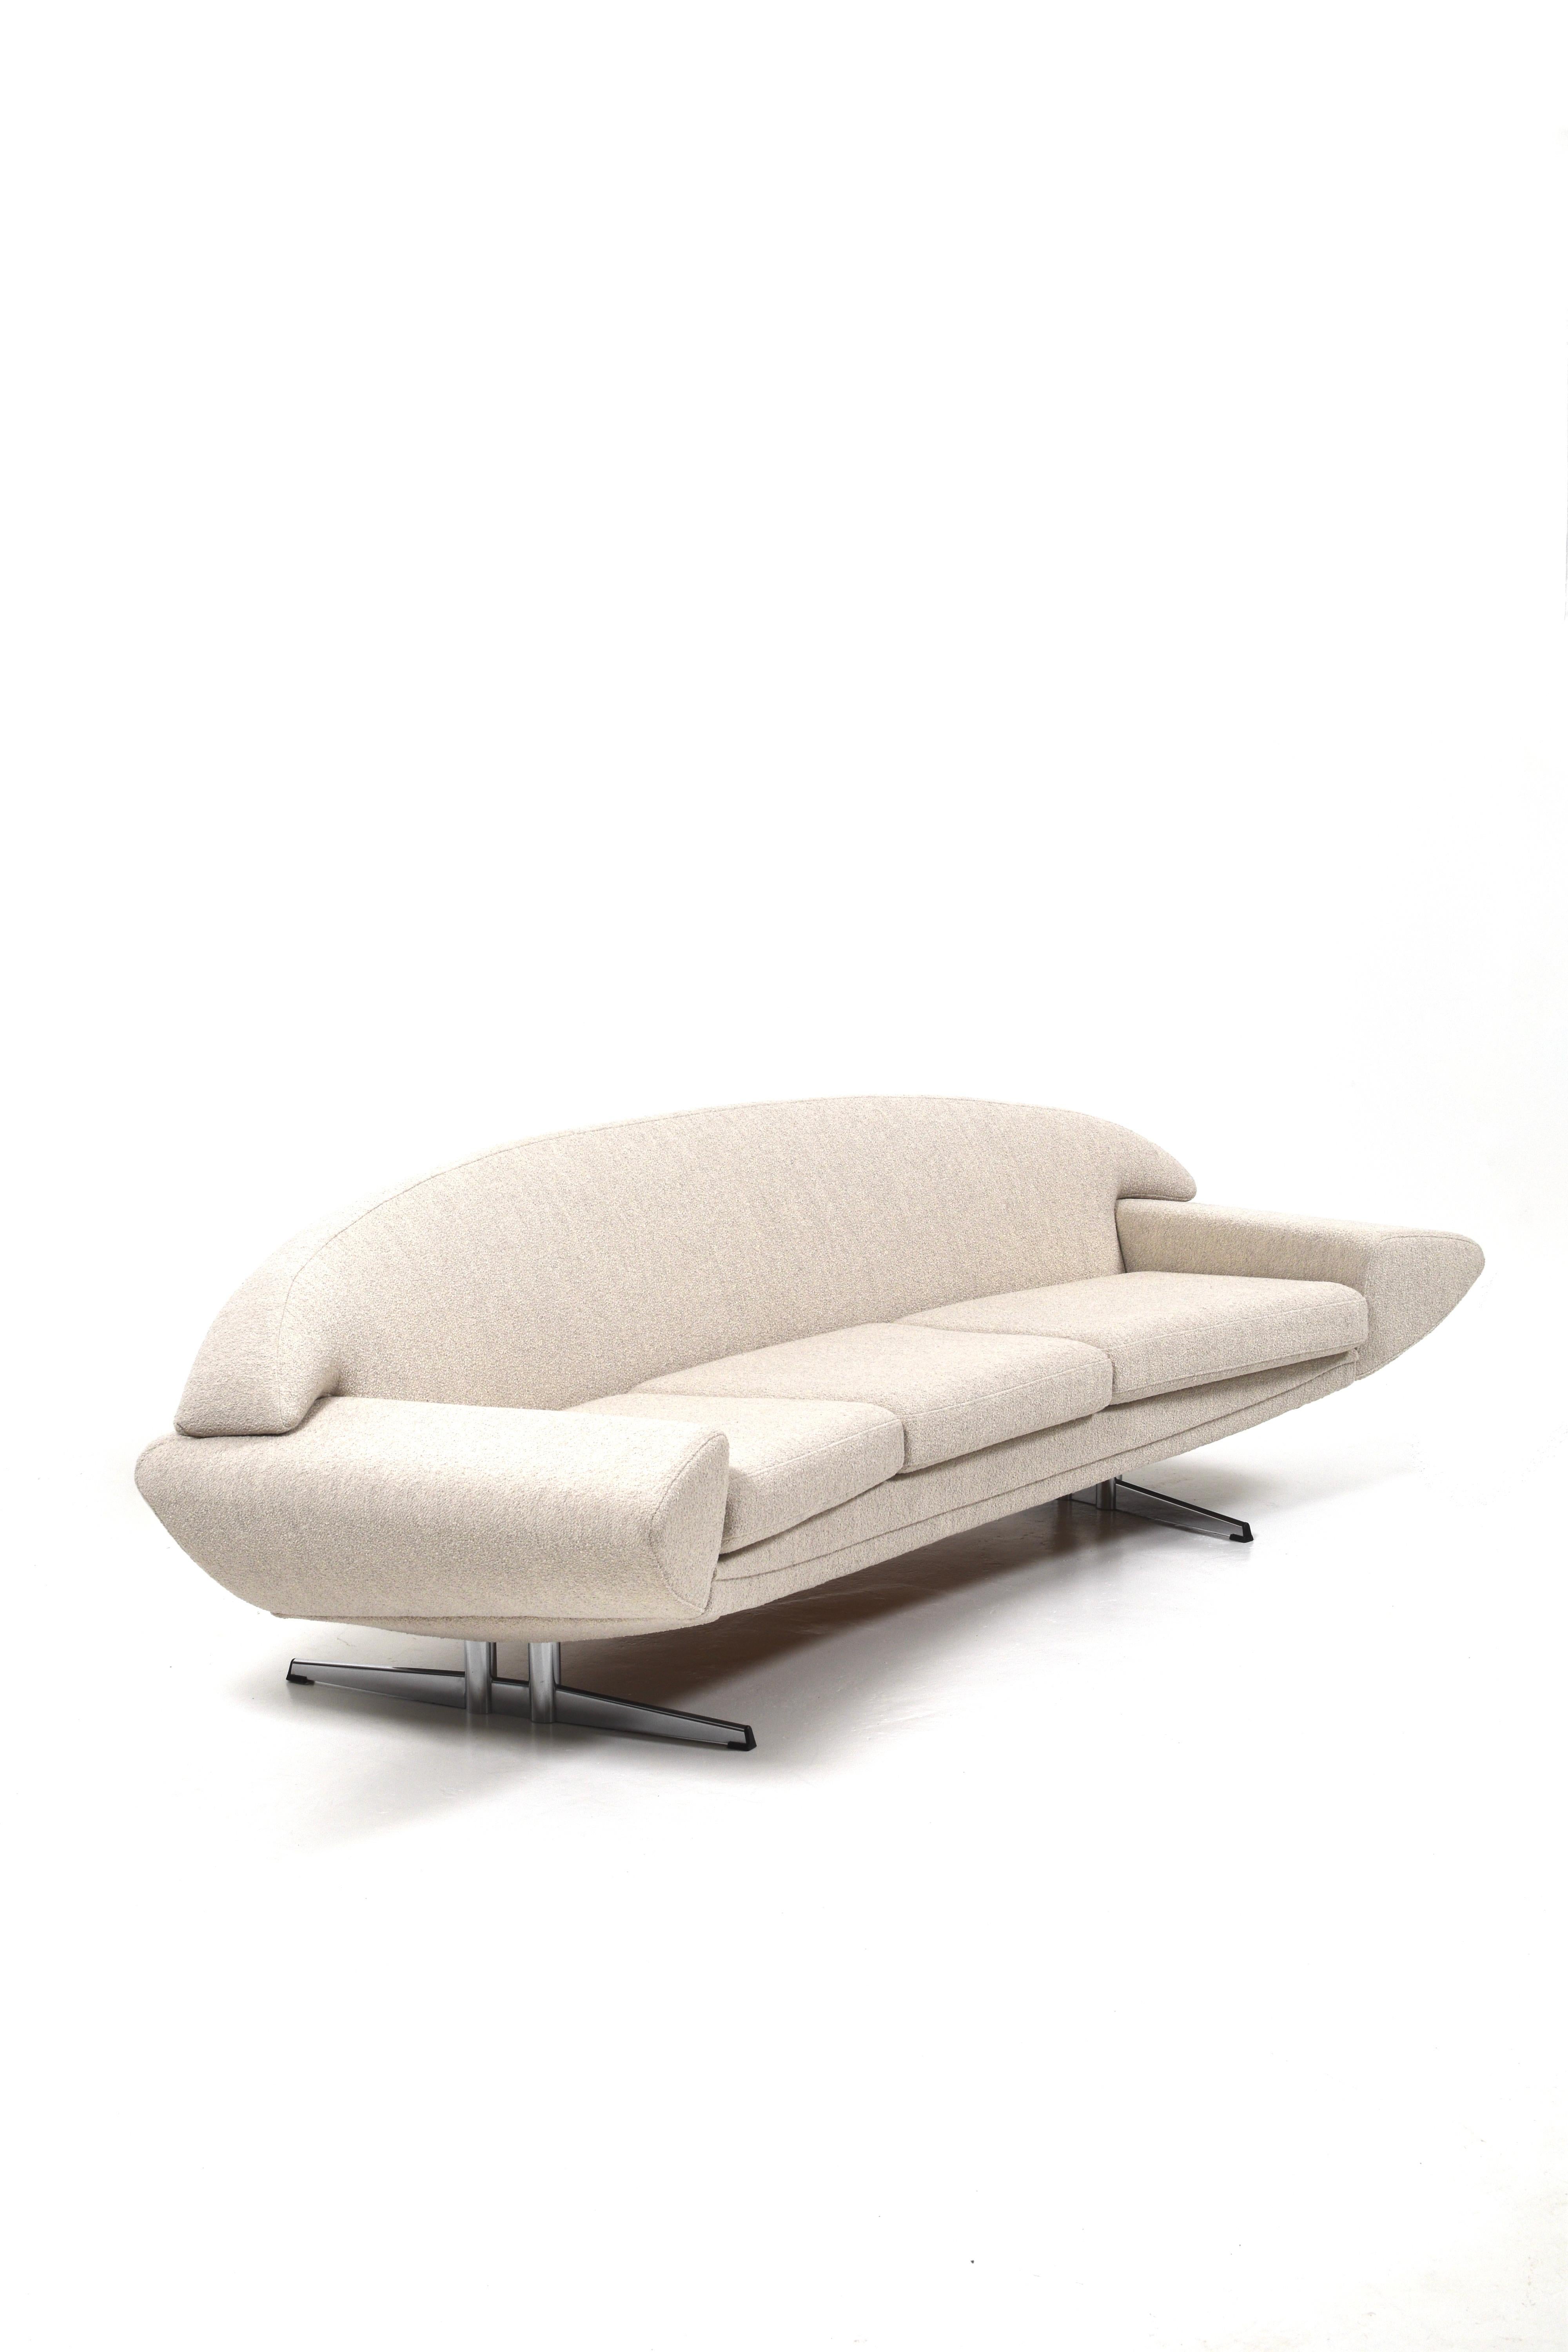 Fantastic sofa from the 